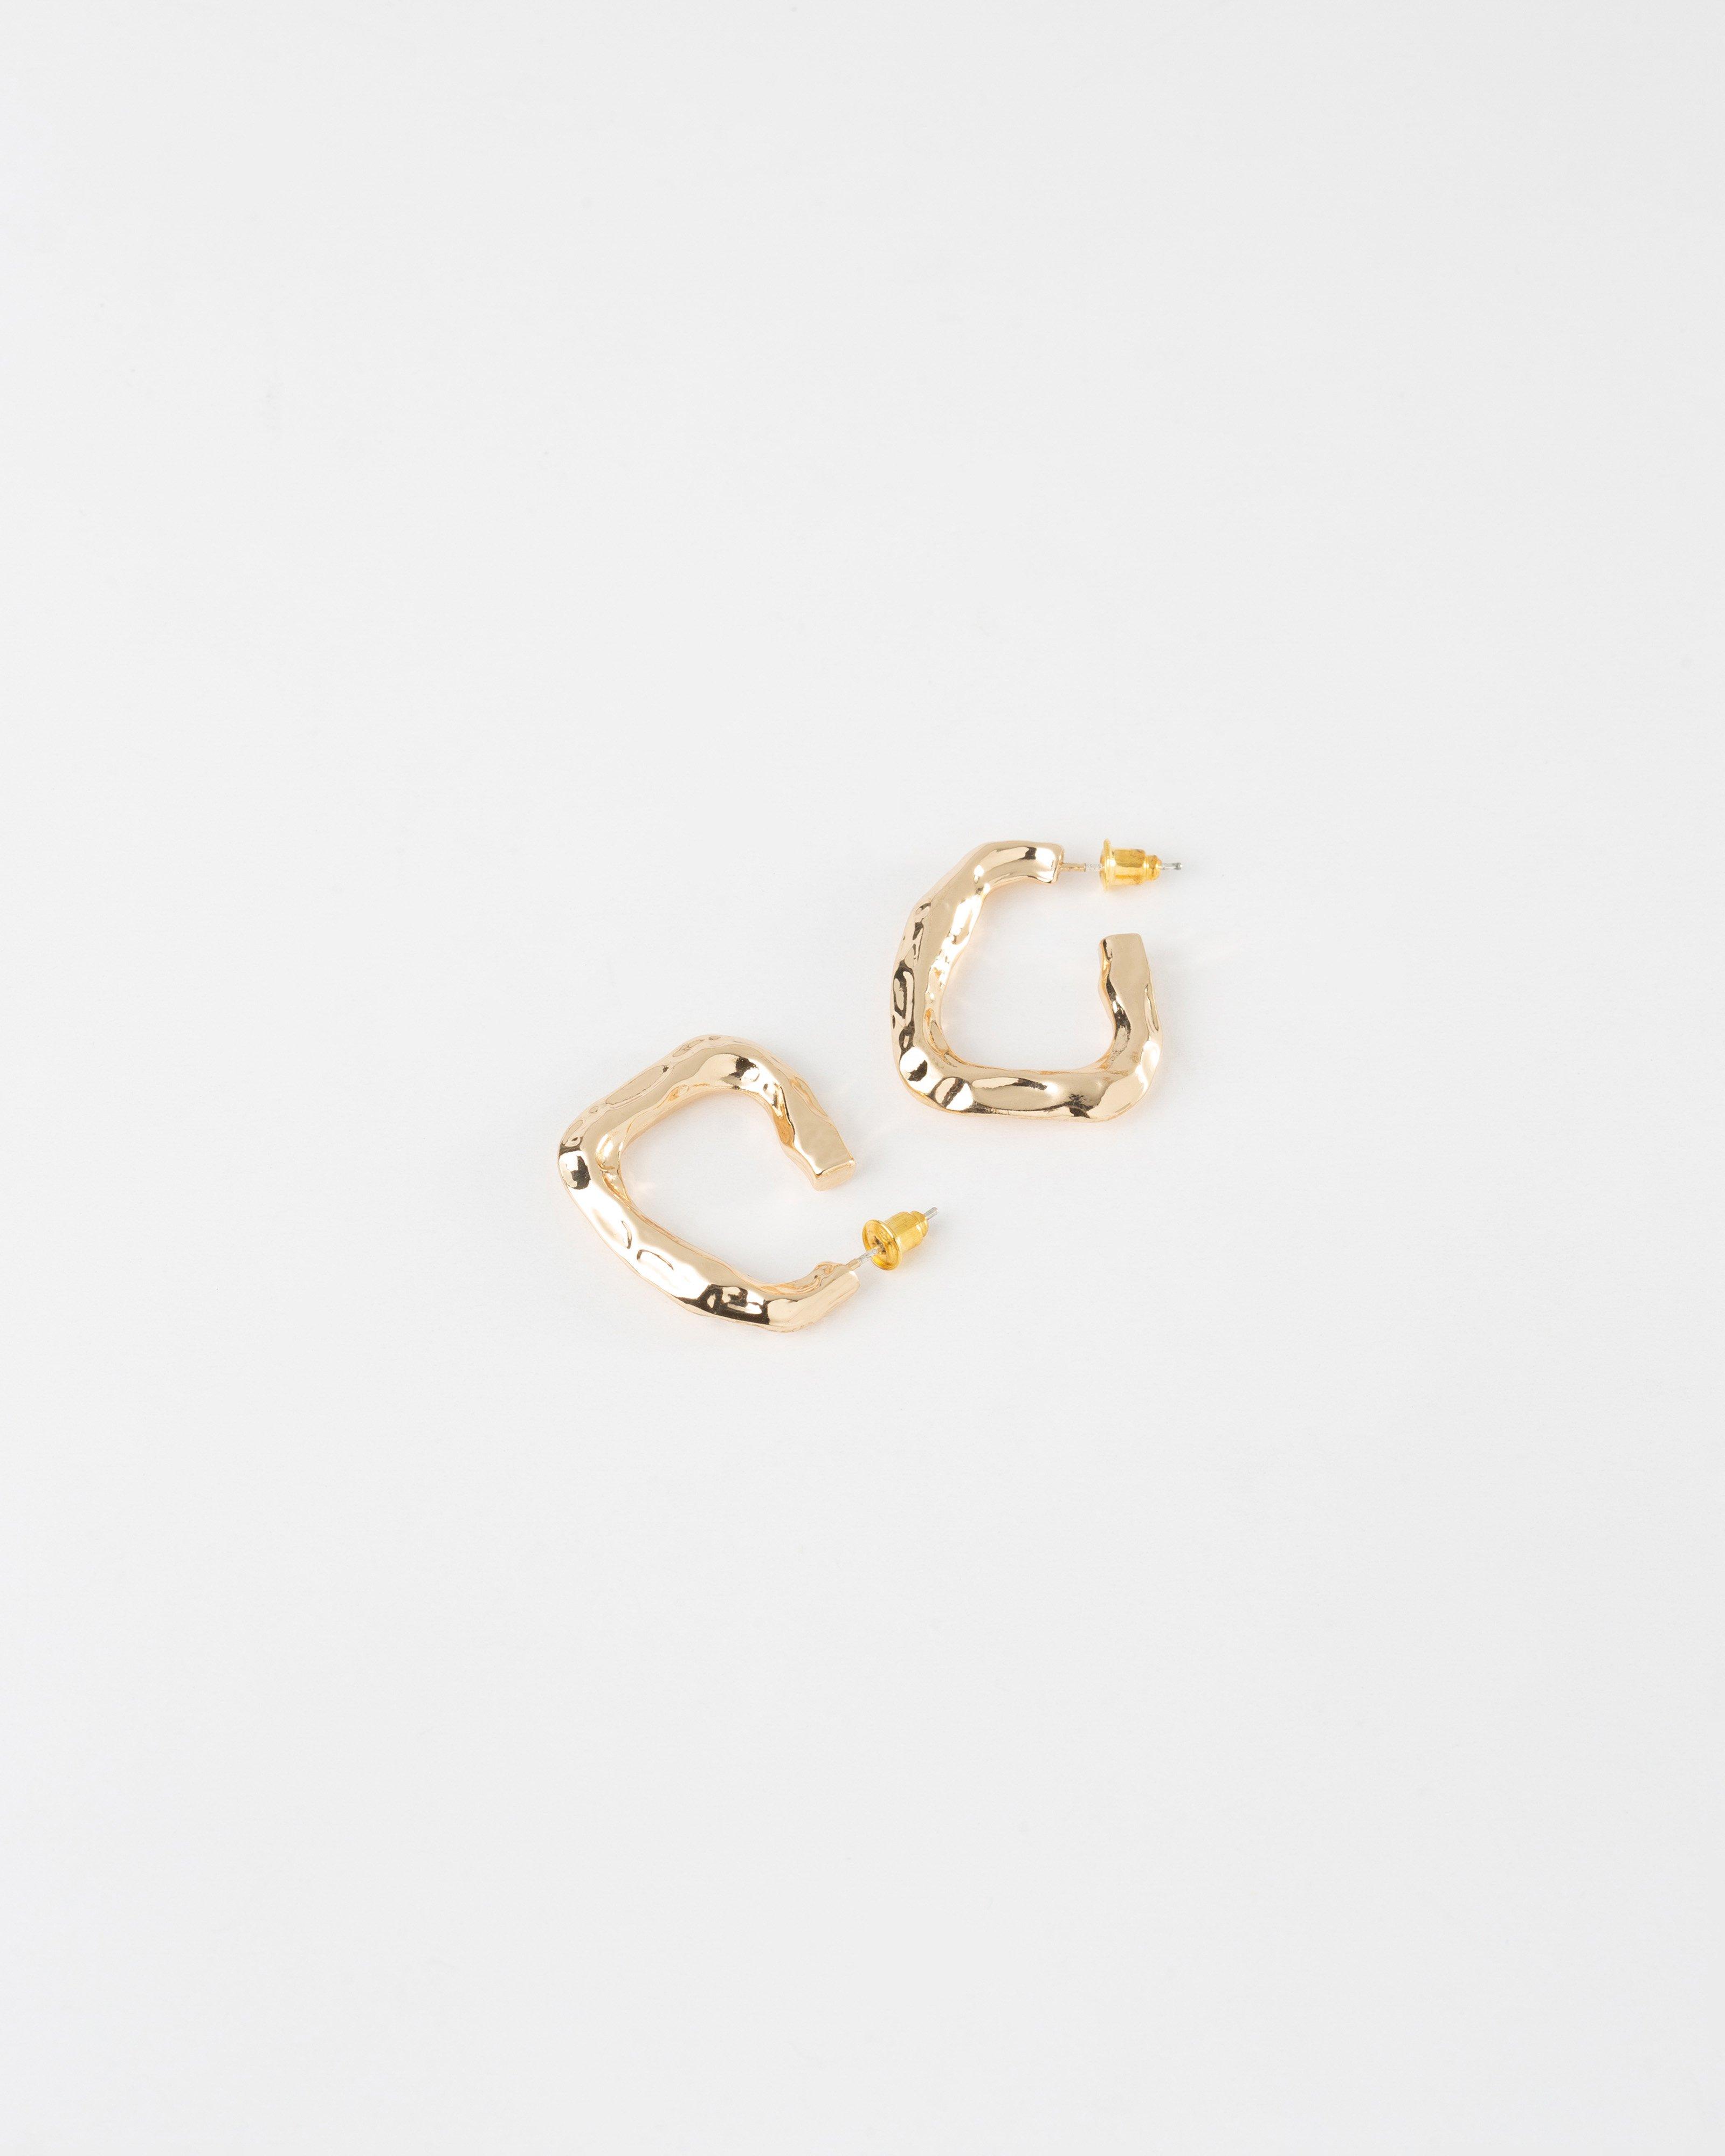 Indented Shiny Hoop Earrings -  Gold